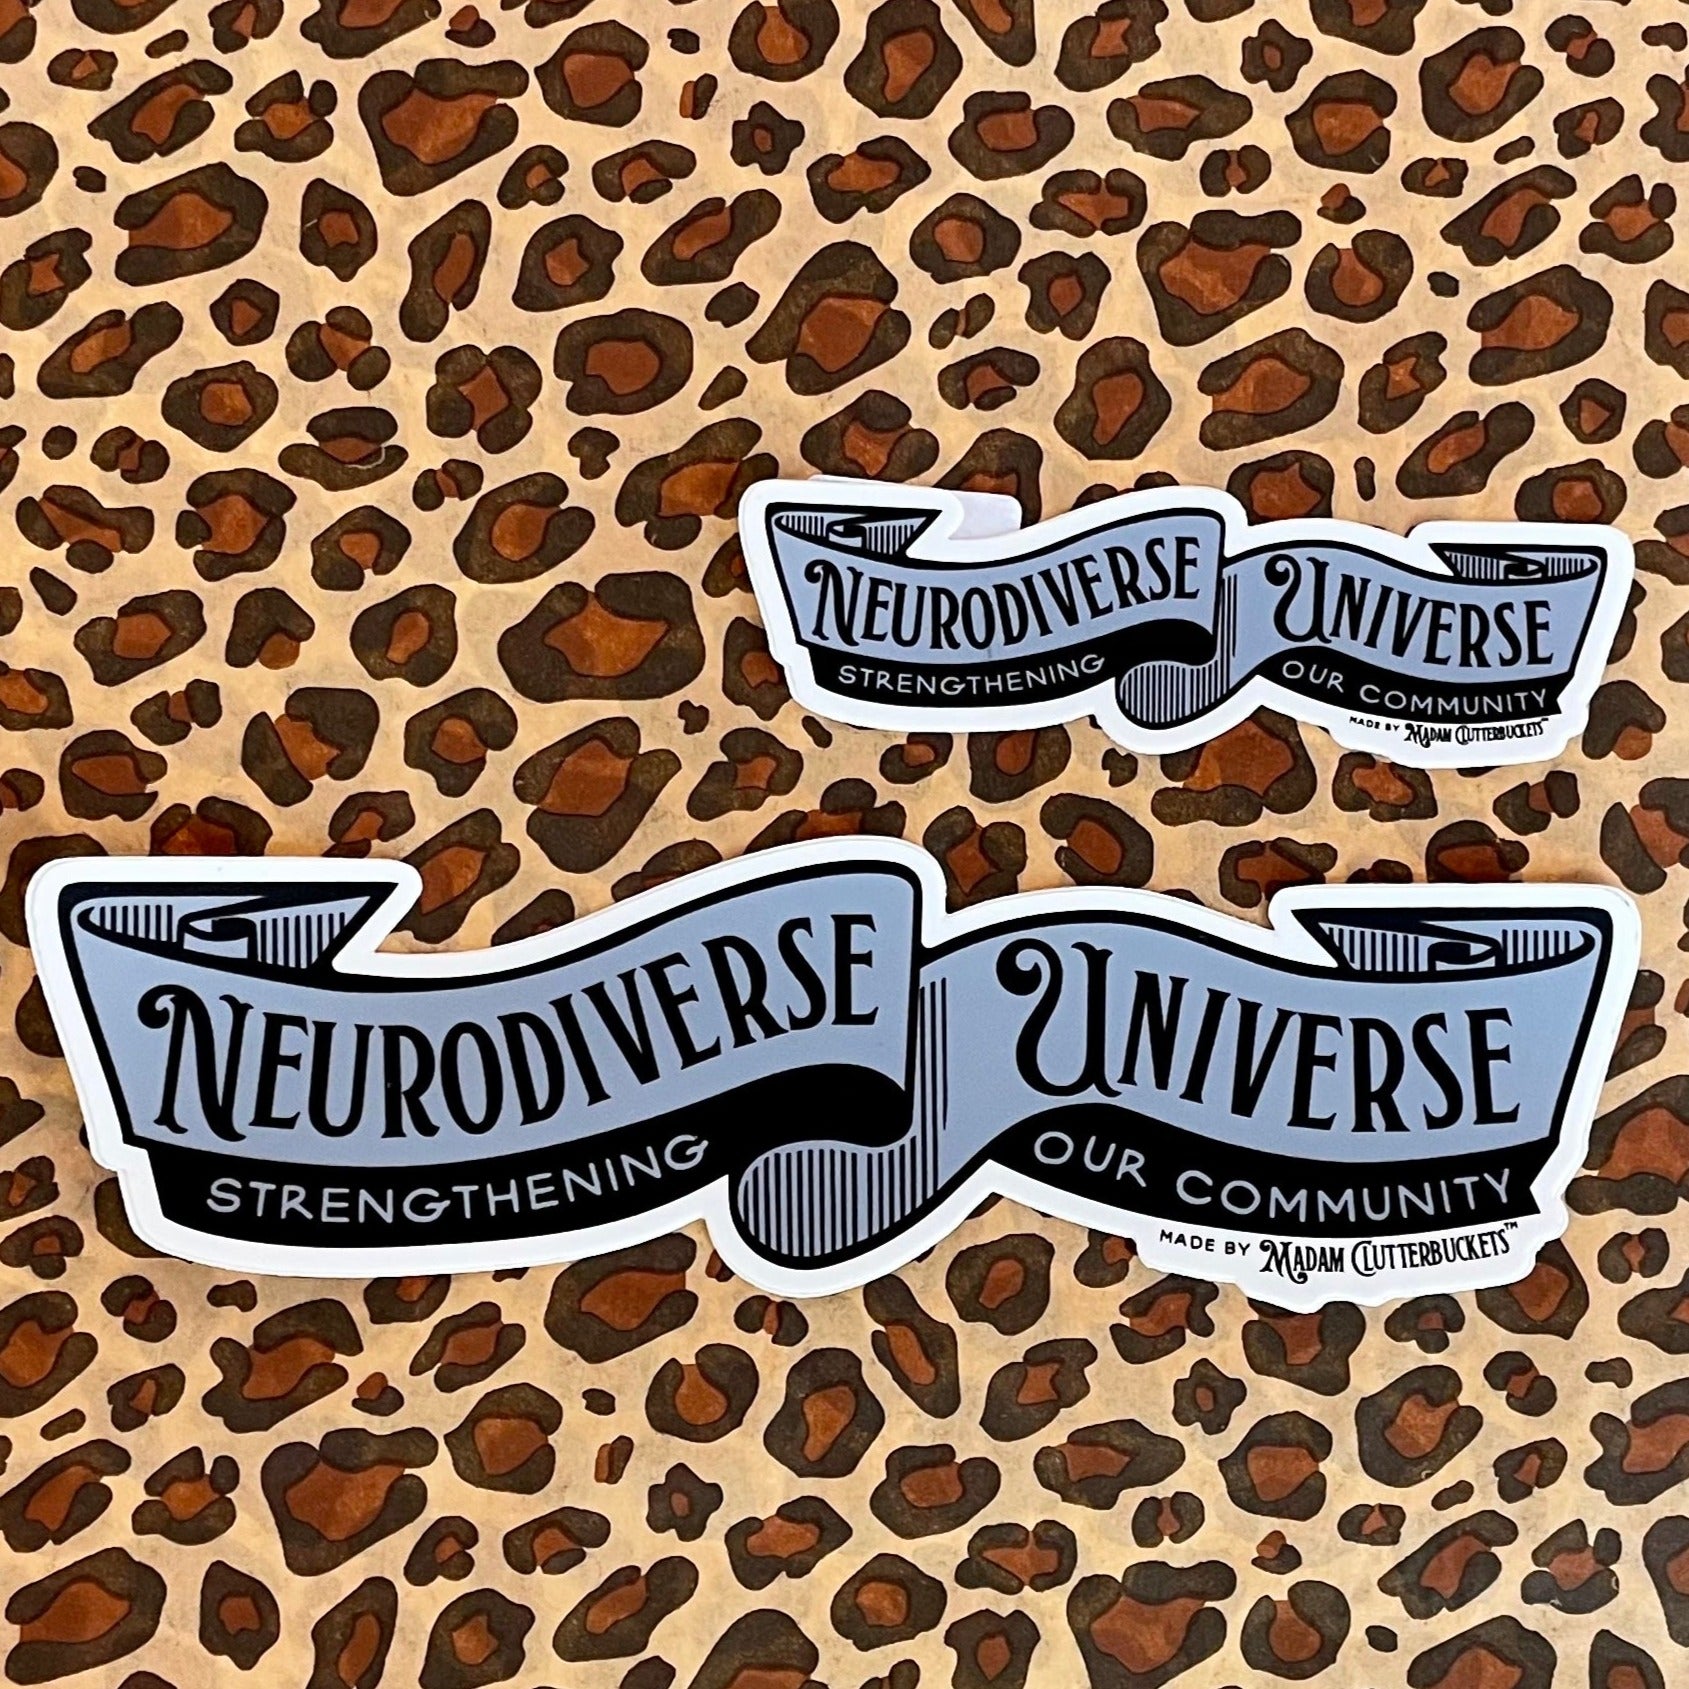 Neurodiverse Universe, Strengthening our Community Banner Sticker: Two Sizes!